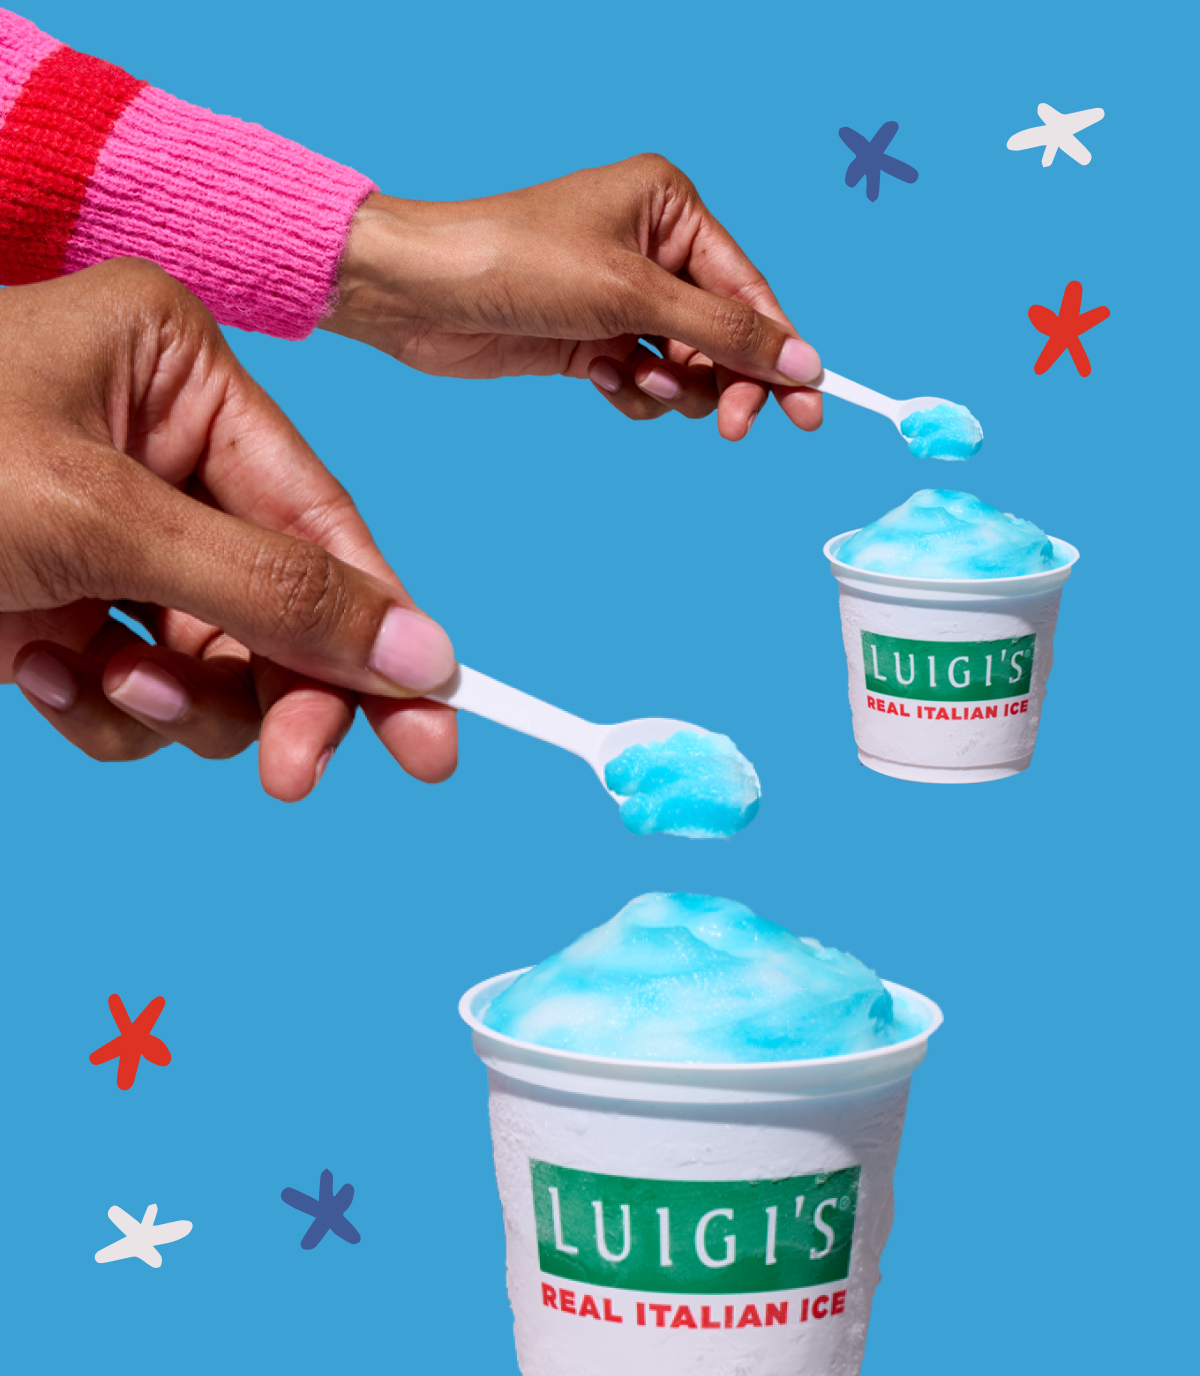 Two hands scooping blue raspberry and lemon swirl LUIGI'S Real Italian Ice. There are two cups, and each hand is holding a white spoon with a scoop of blue Italian ice. Background is blue with red, white, and blue stars.